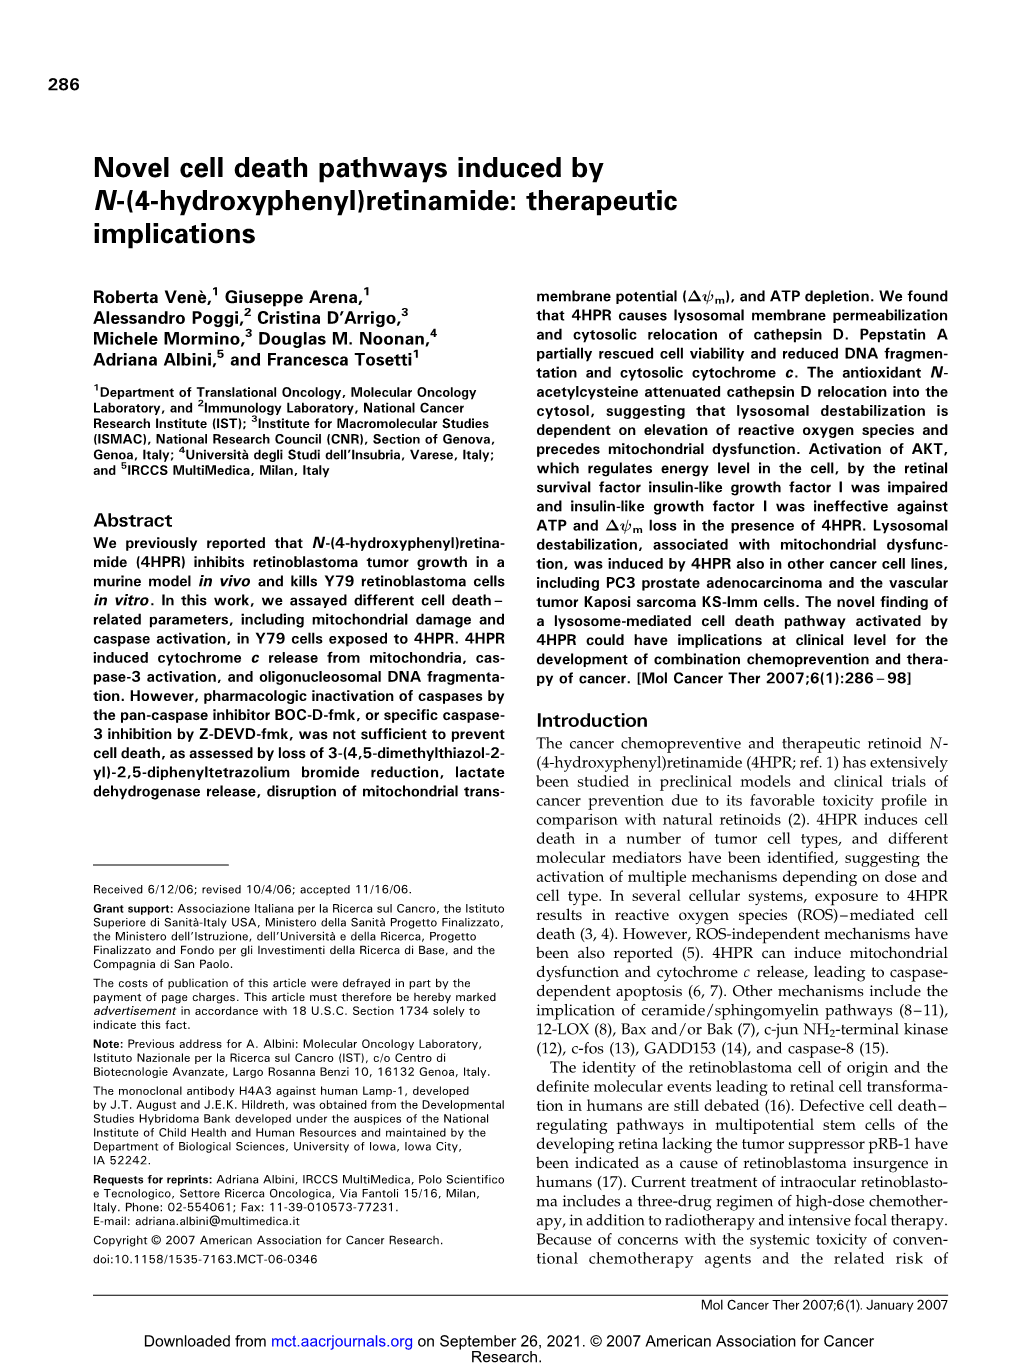 Novel Cell Death Pathways Induced by N-(4-Hydroxyphenyl)Retinamide: Therapeutic Implications